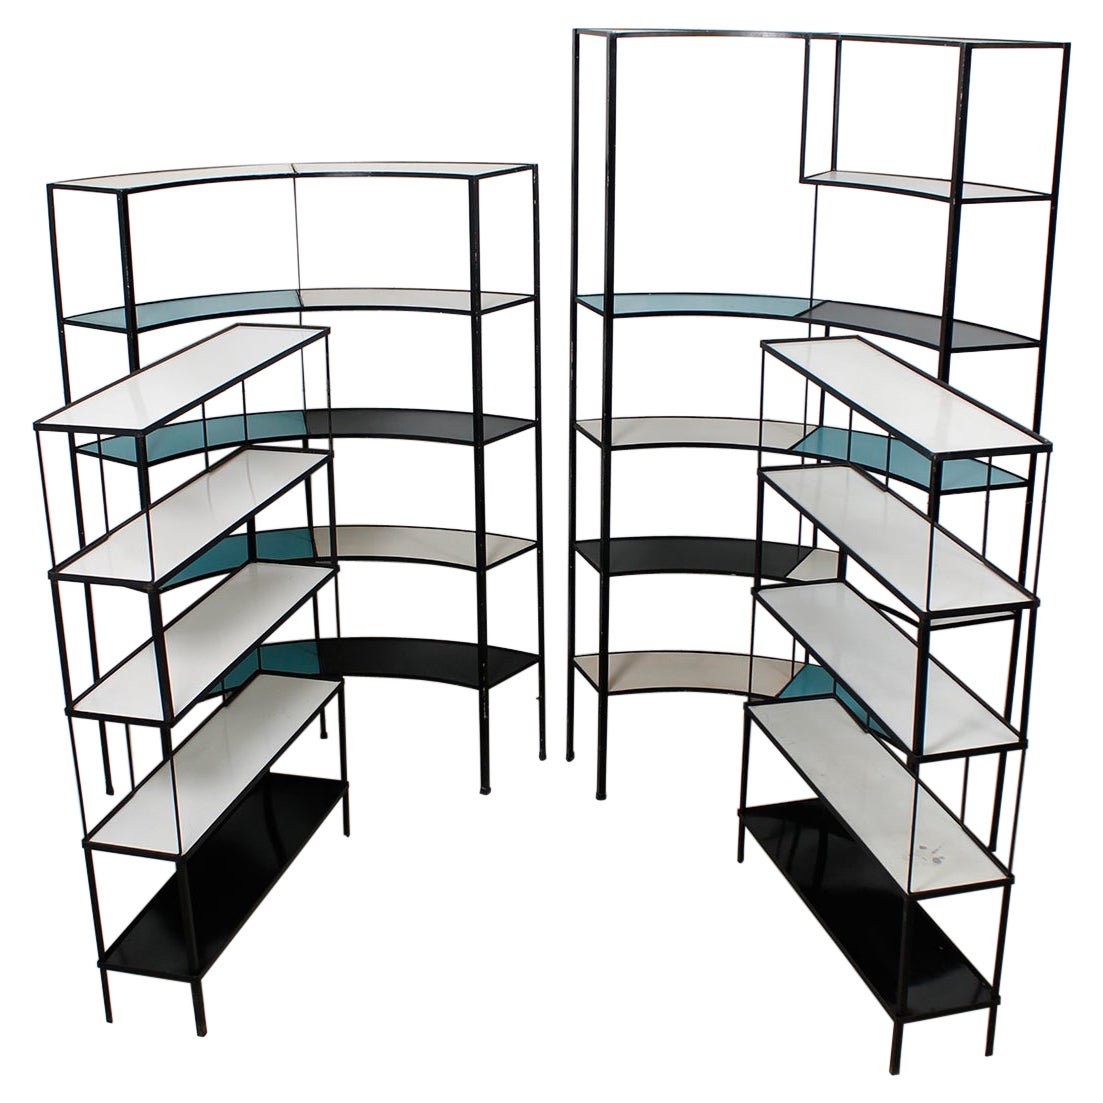 Set of Rare Multi-Color Curved Shelving Units by Frederick Weinberg